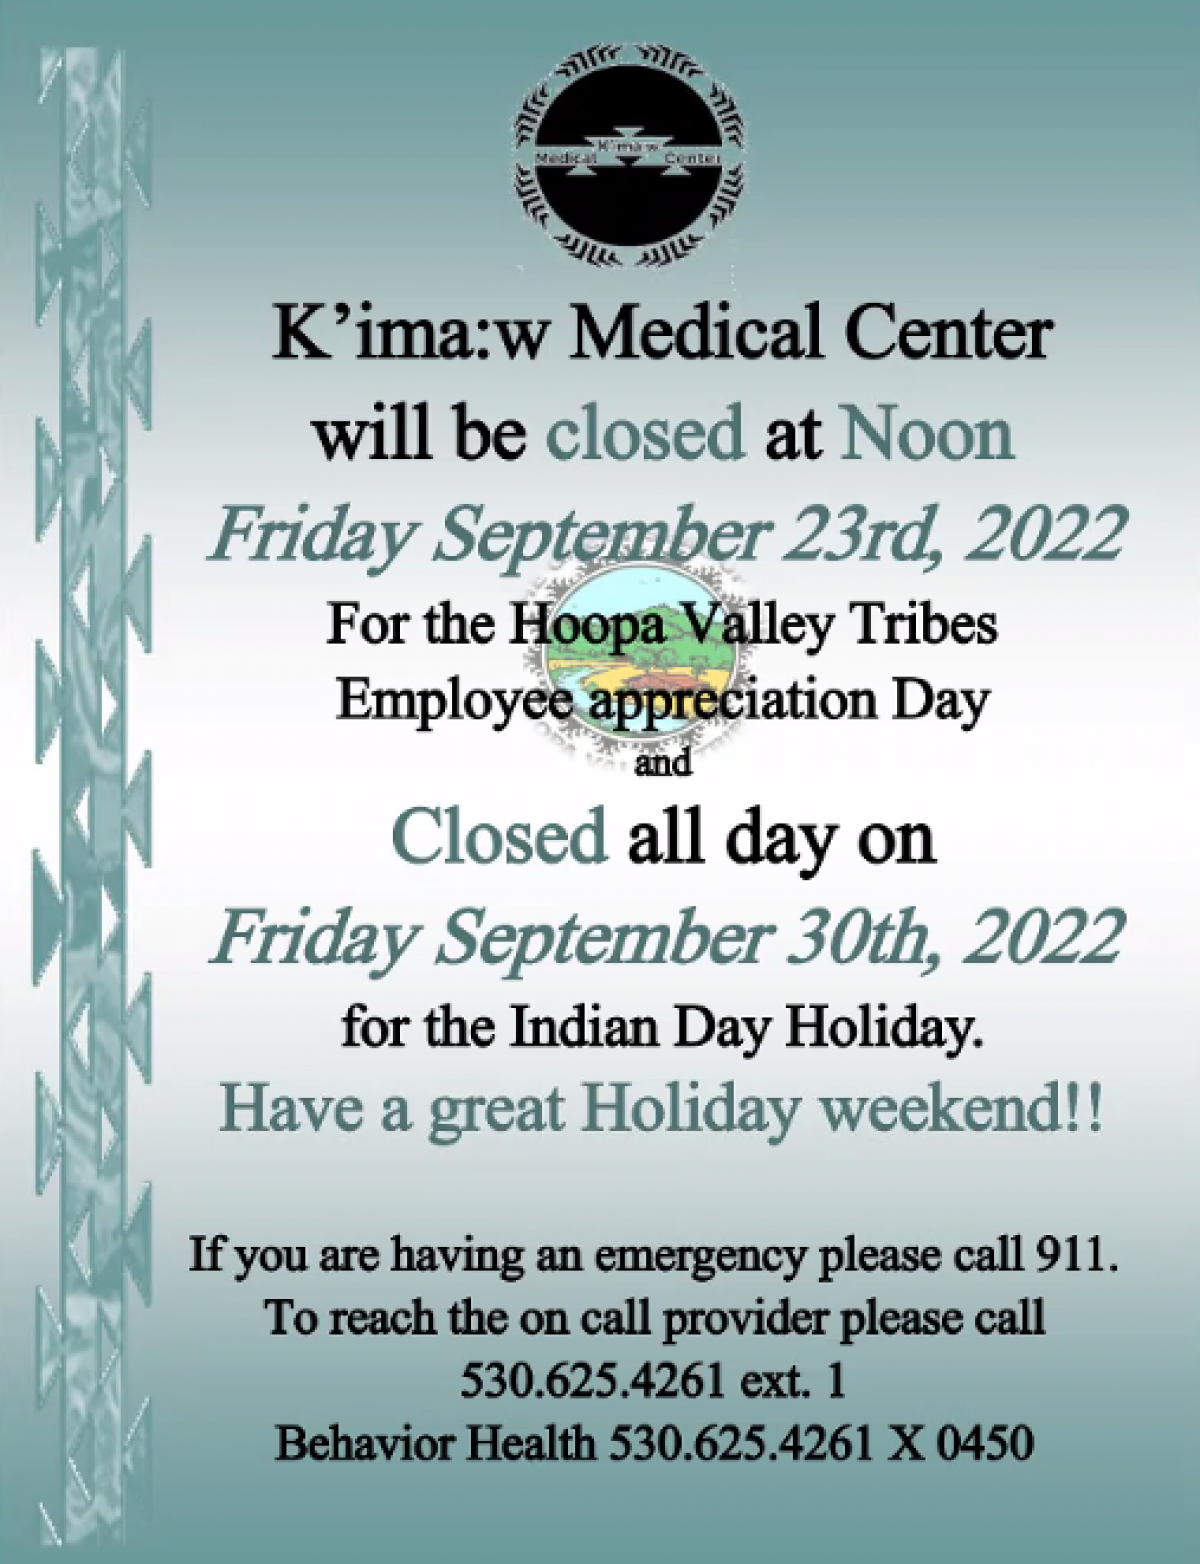 K’ima:w Medical Center will be closed at noon on Friday September 23rd, 2022 & All Day September 30th